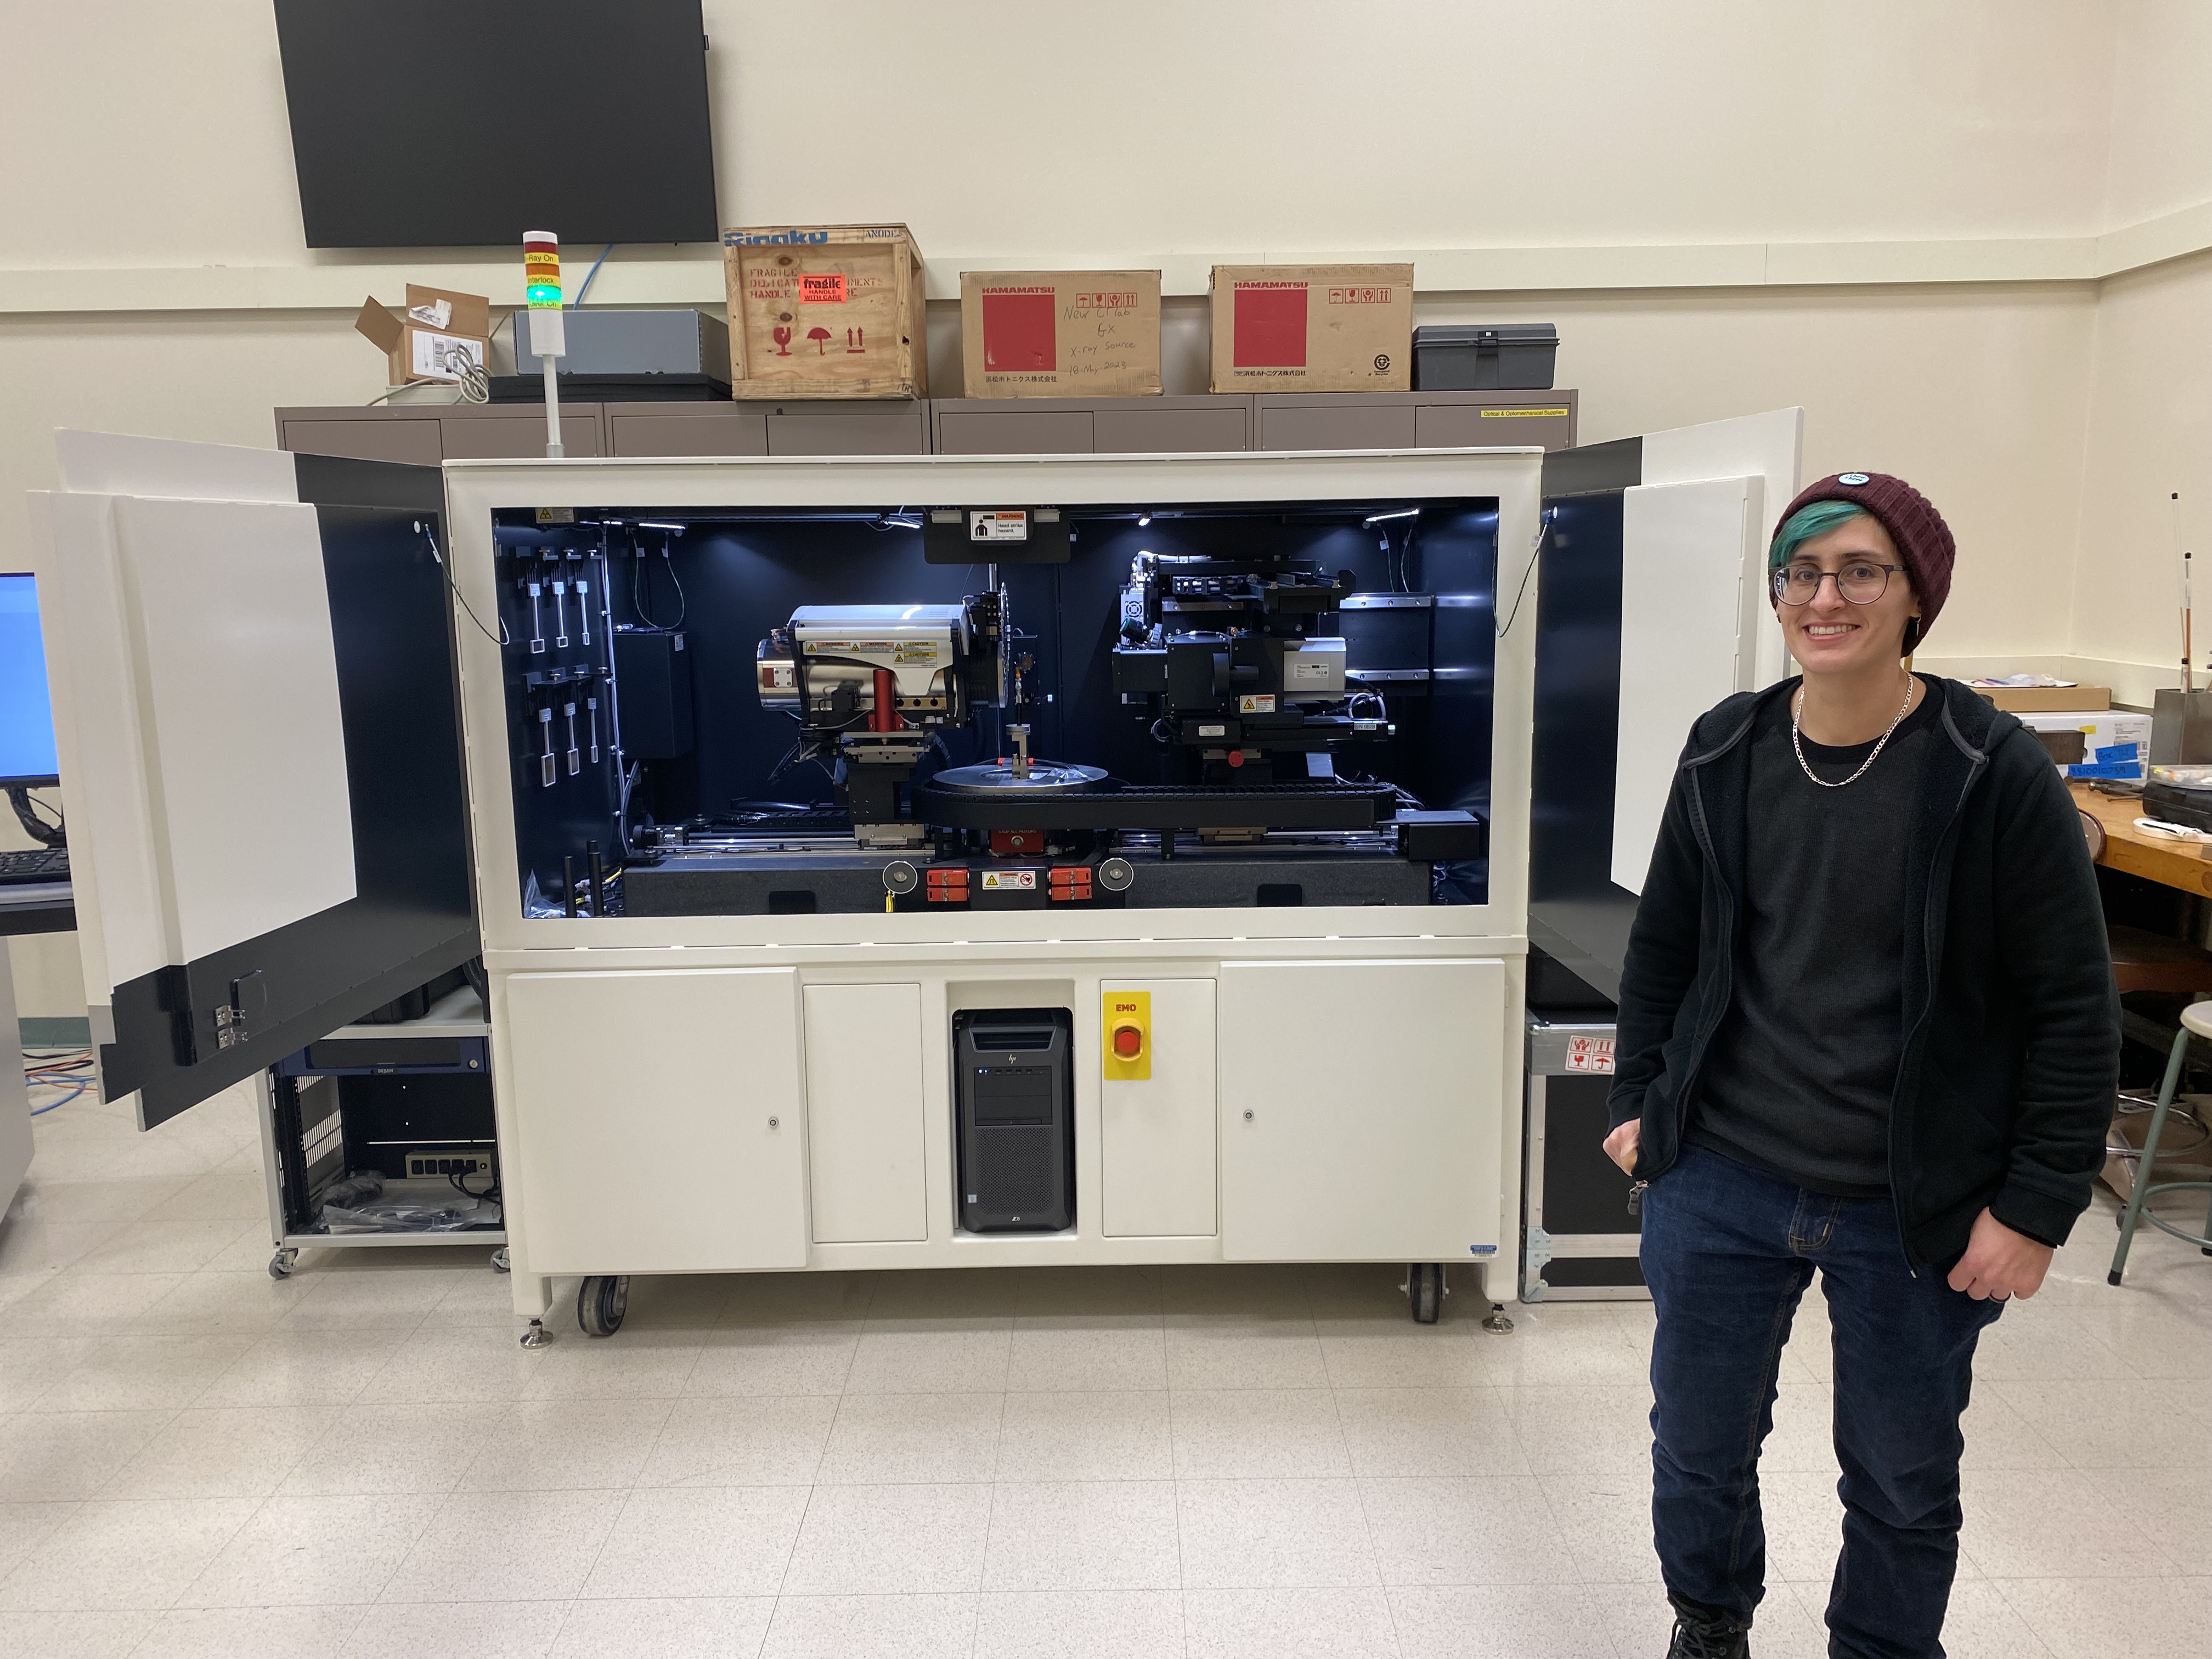 Beckman microscopist T. Josek stands next to the new Zeiss Xradia 630 Versa micro-CT scanner, which is located in the institute's Microscopy Suite. 